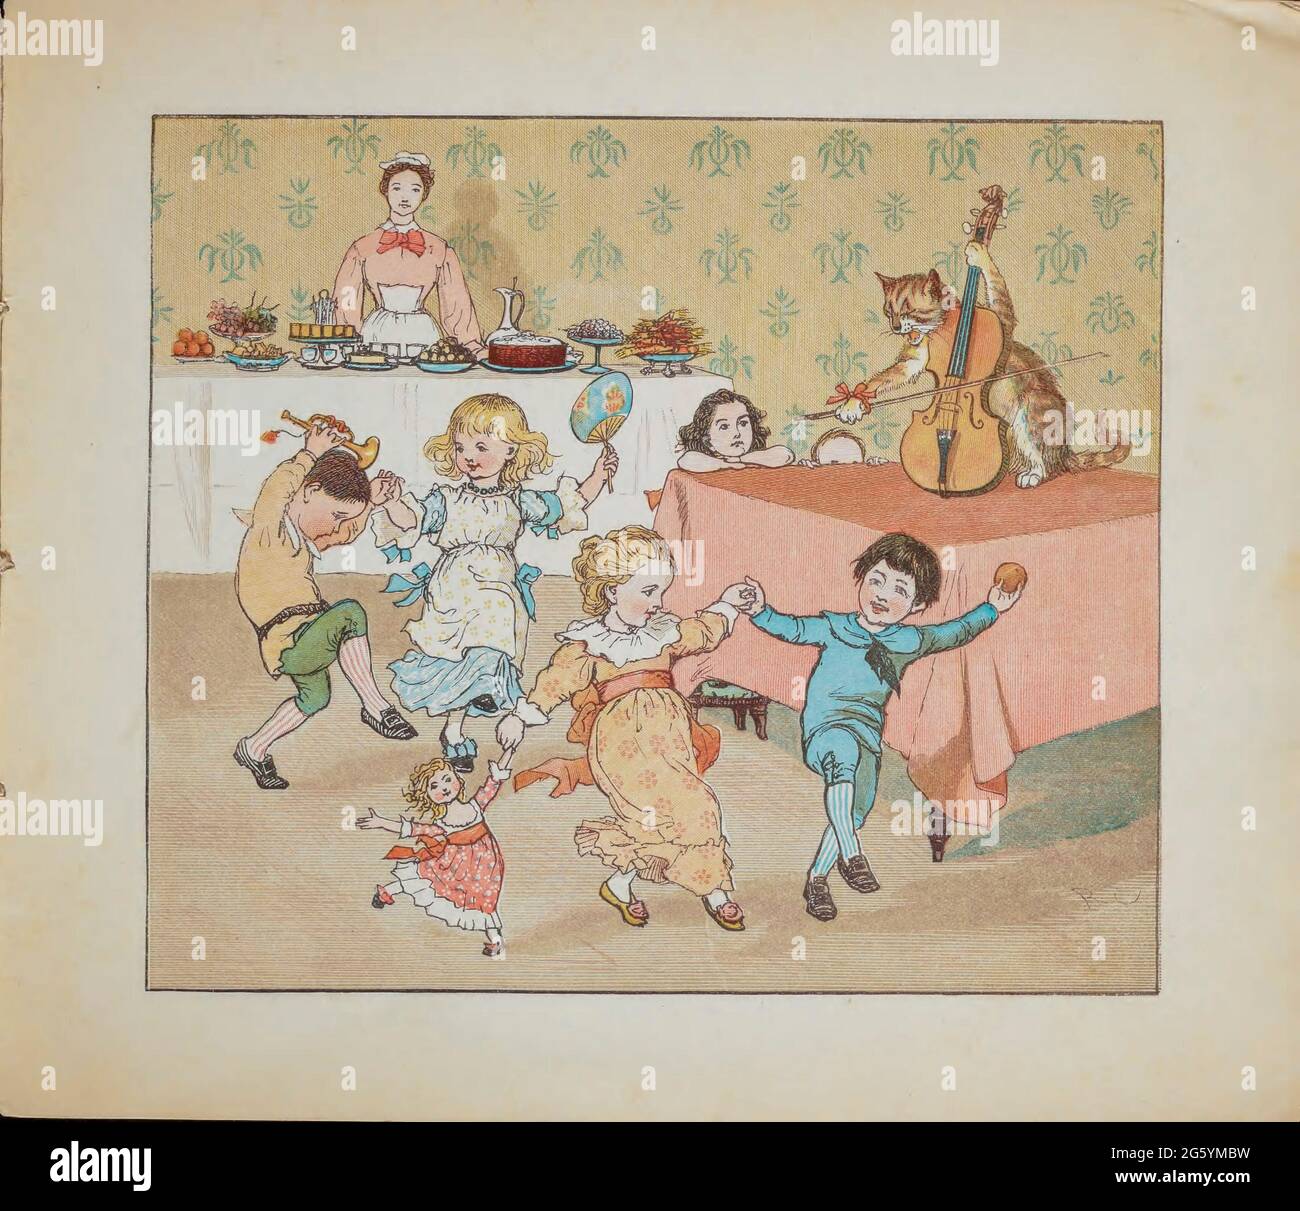 Hey, diddle, diddle, the cat and the fiddle / The cow jumped over the moon / The little dog laughed to see such fun / And the dish ran away with the spoon. from the book  ' Hey diddle diddle and Baby bunting ' by Randolph Caldecott, Published in London by George Routledge & Sons in 1882 Stock Photo